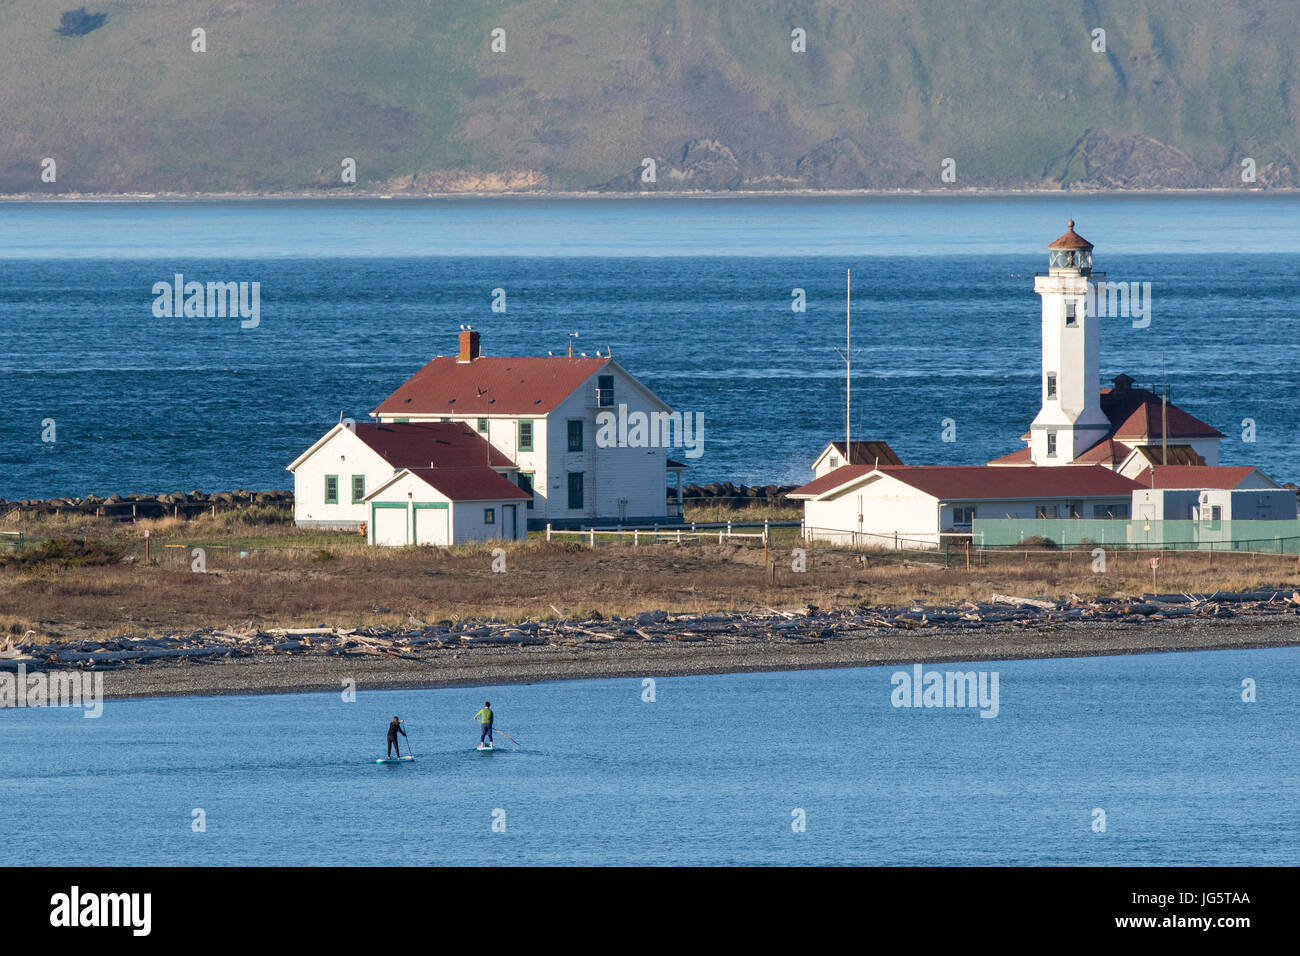 Stand up paddleboarding, stand up paddle boarding vicino al punto Wilson Lighthouse, il faro, in Port Townsend, Washington. Foto Stock